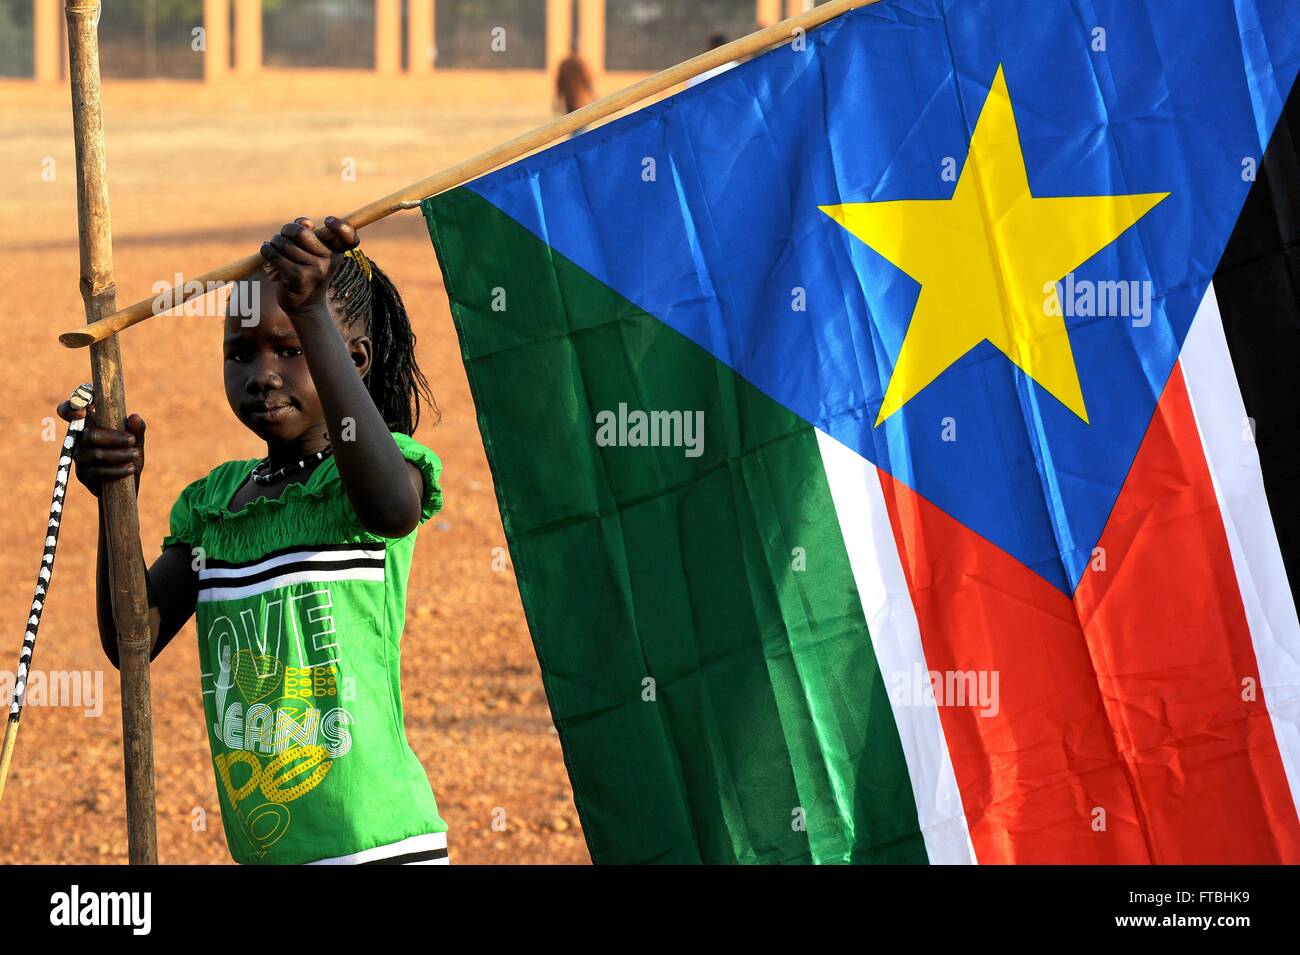 A young Sudanese girl hangs a flag of newly independent South Sudan during celebrations marking the birth of the new nation January 30, 2011 in Juba, South Sudan. Stock Photo